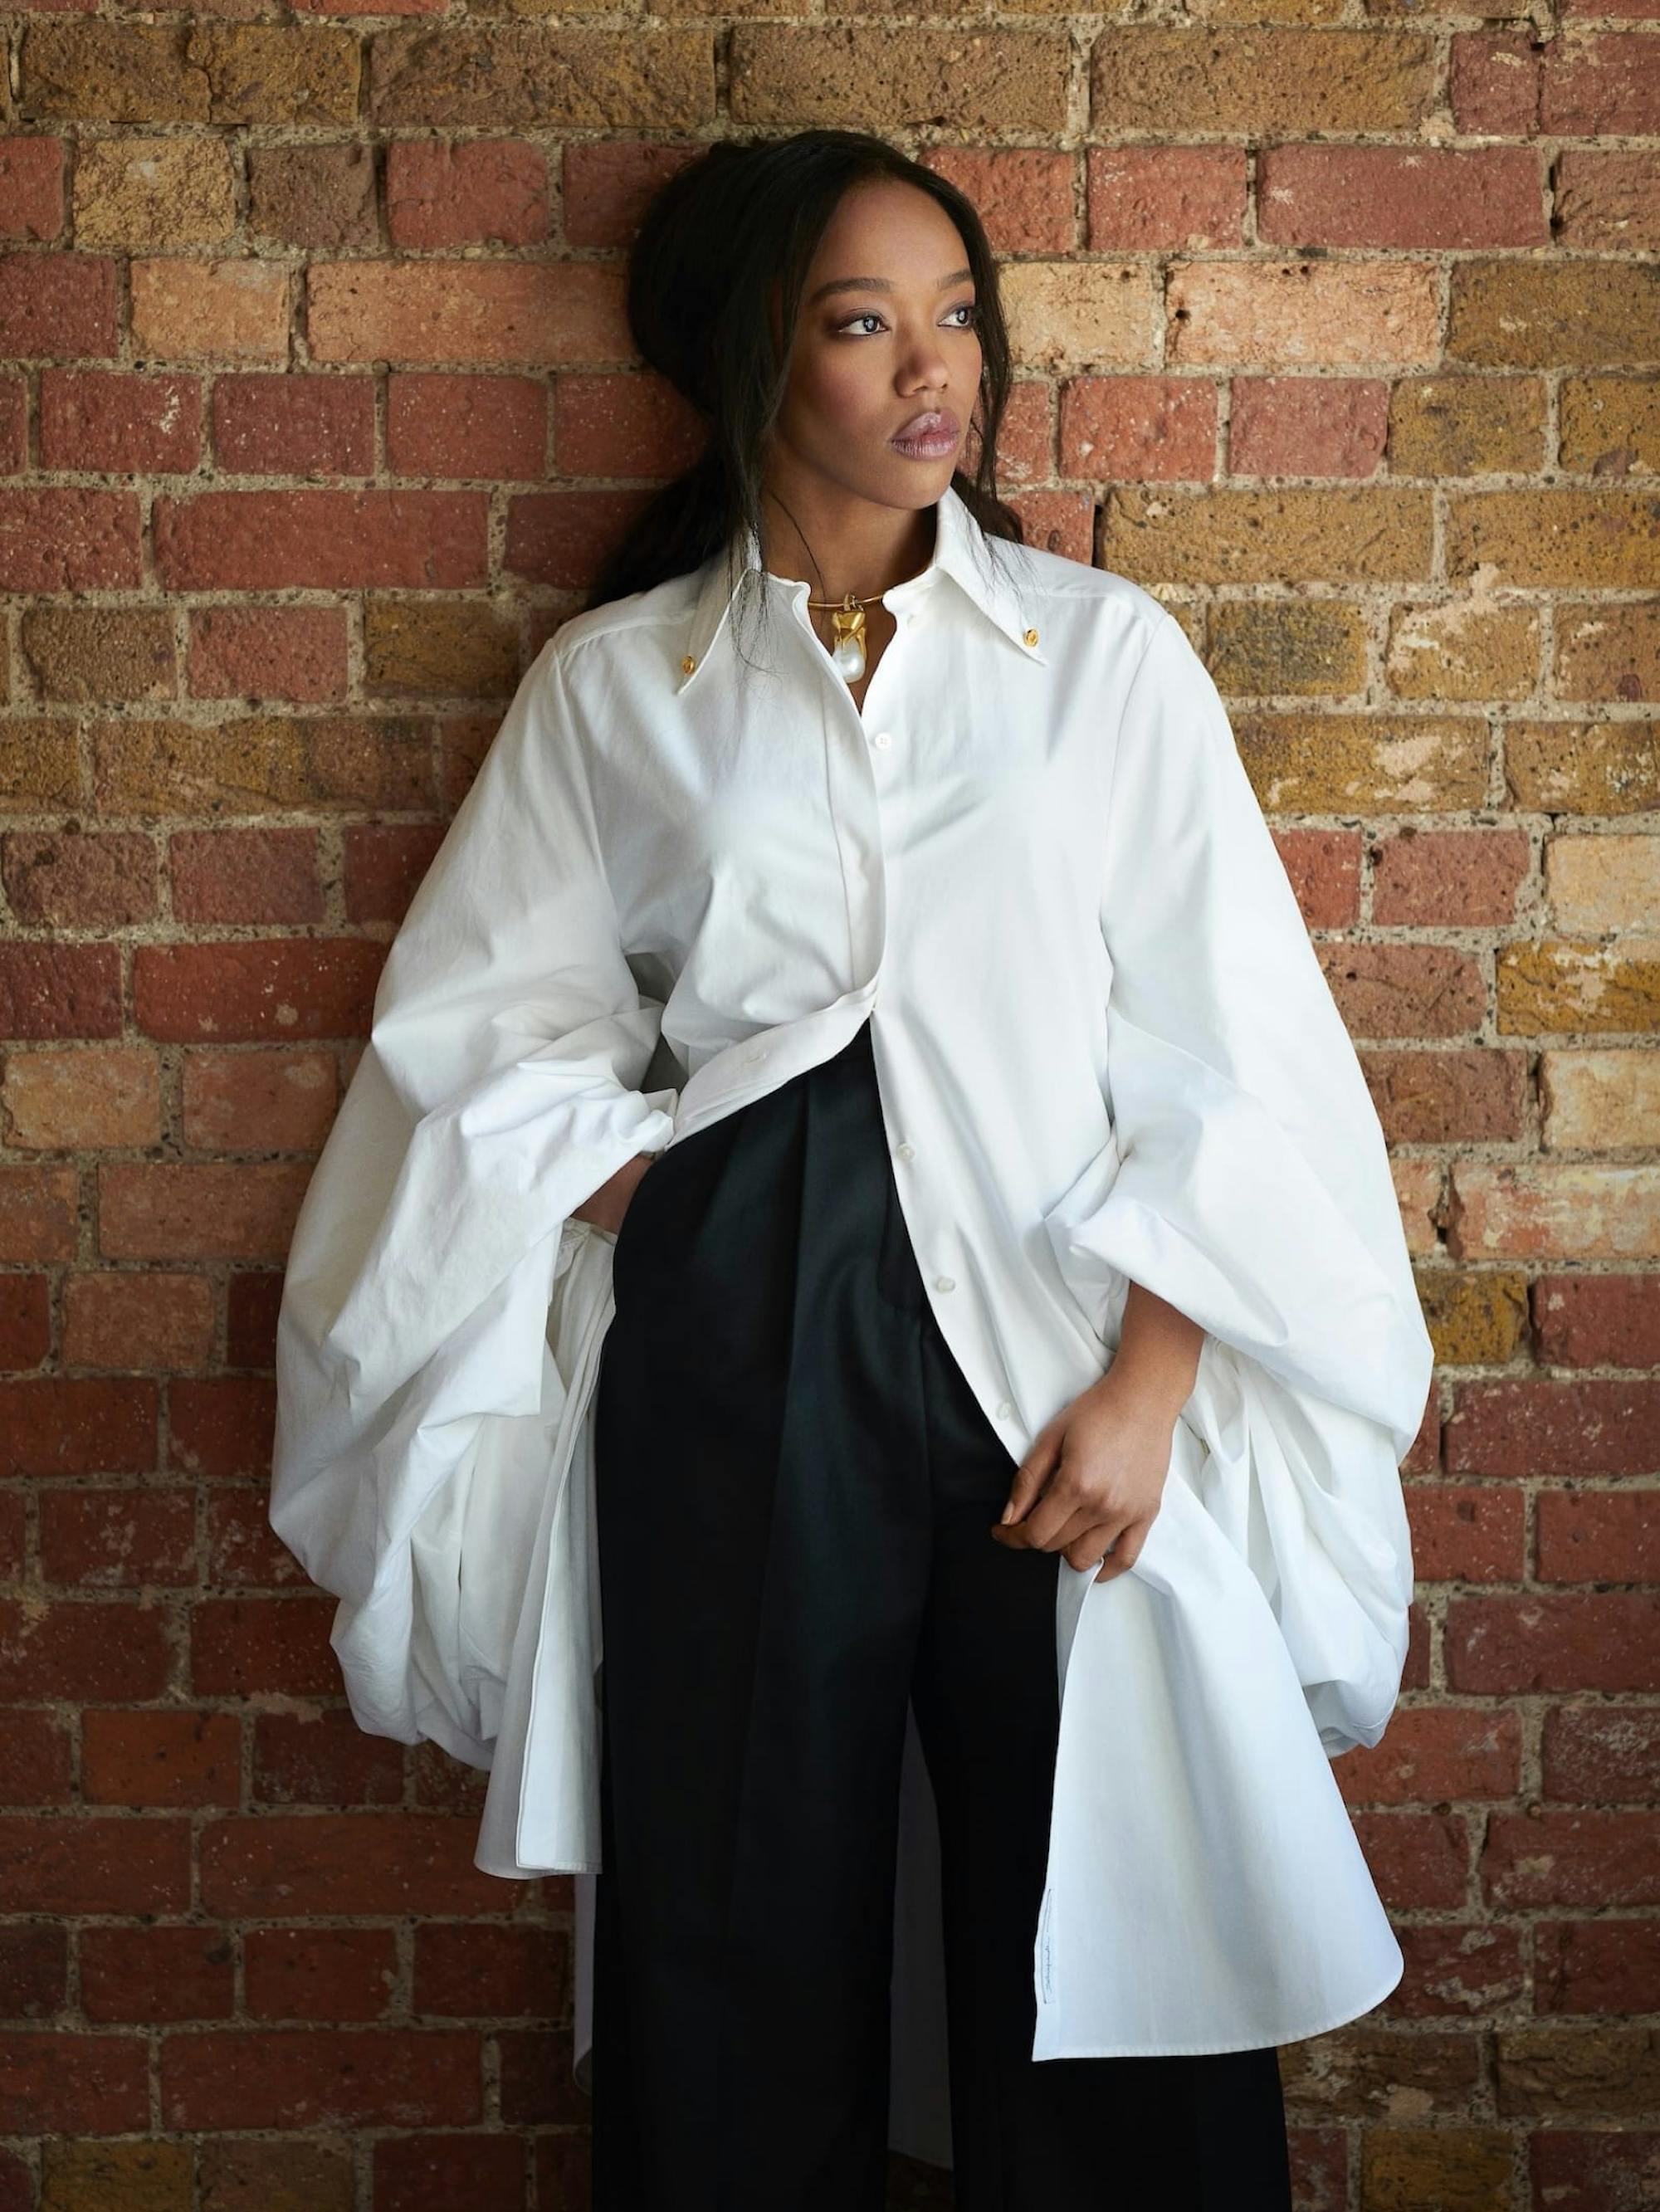 Naomi Ackie sports a long white buttoned-down shirt, with very wide sleeves, highwaisted black pants, and a fabulous gold and pearl necklace. She rests against a brick wall and looks into the distance.